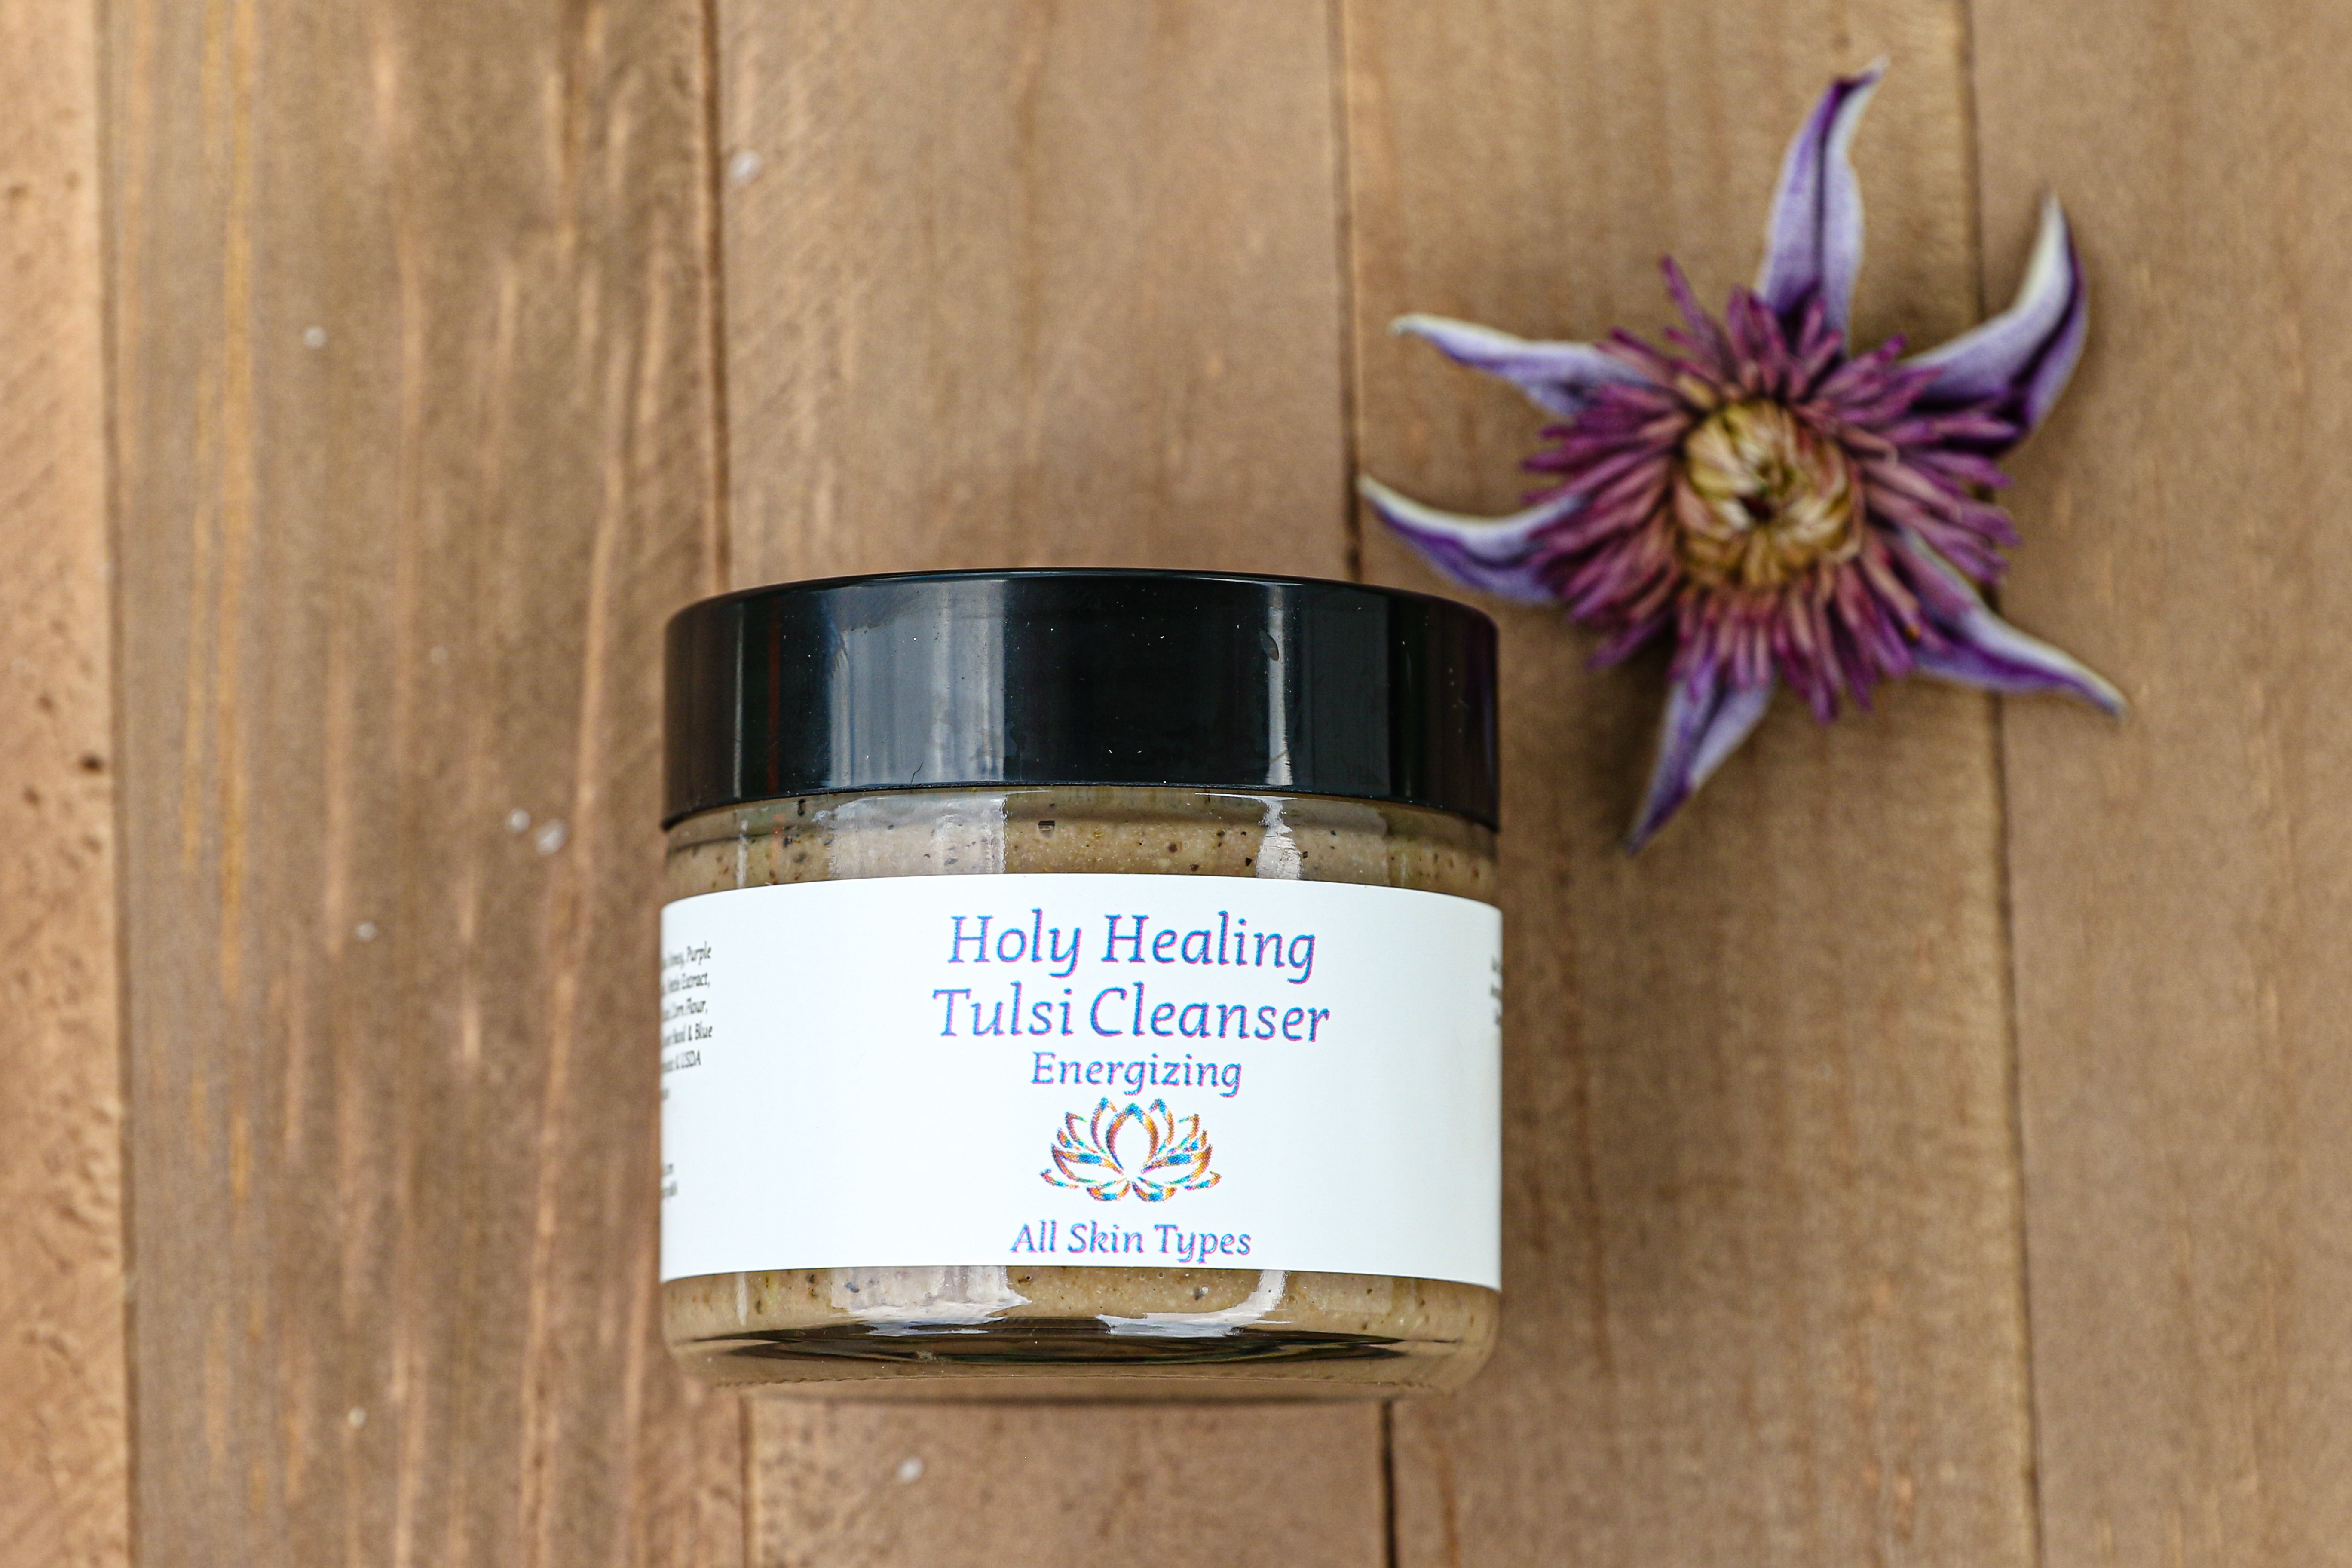 Holy Healing Tulsi Cleanser